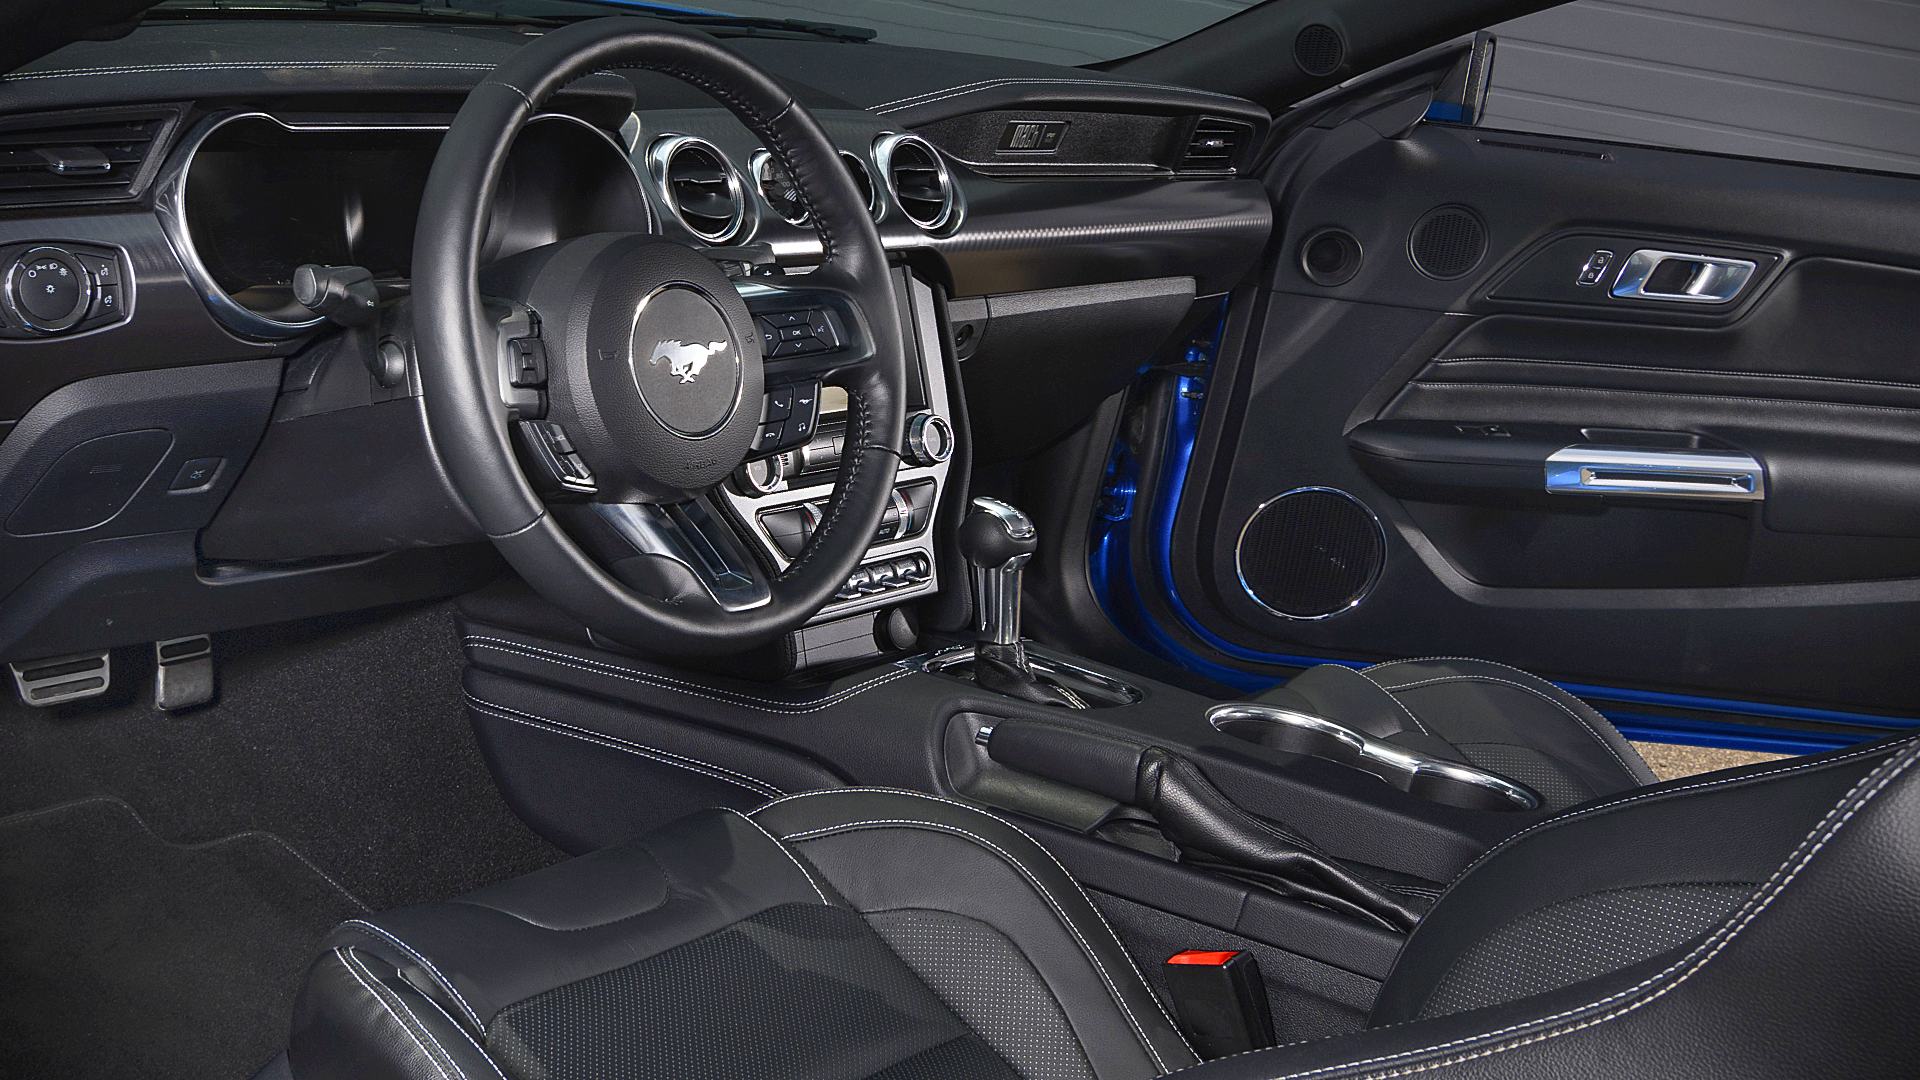 Ford Mustang Mach 1 Interior Image